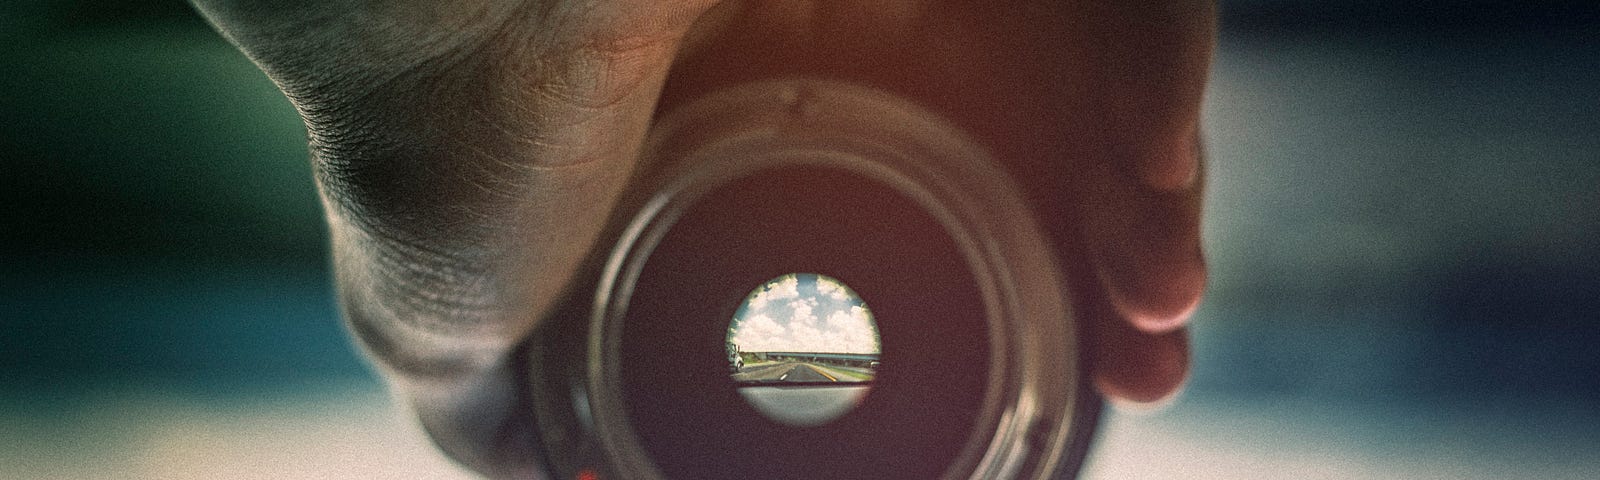 Seeing a landscape upside down and in focus through a small hole in a camera lens